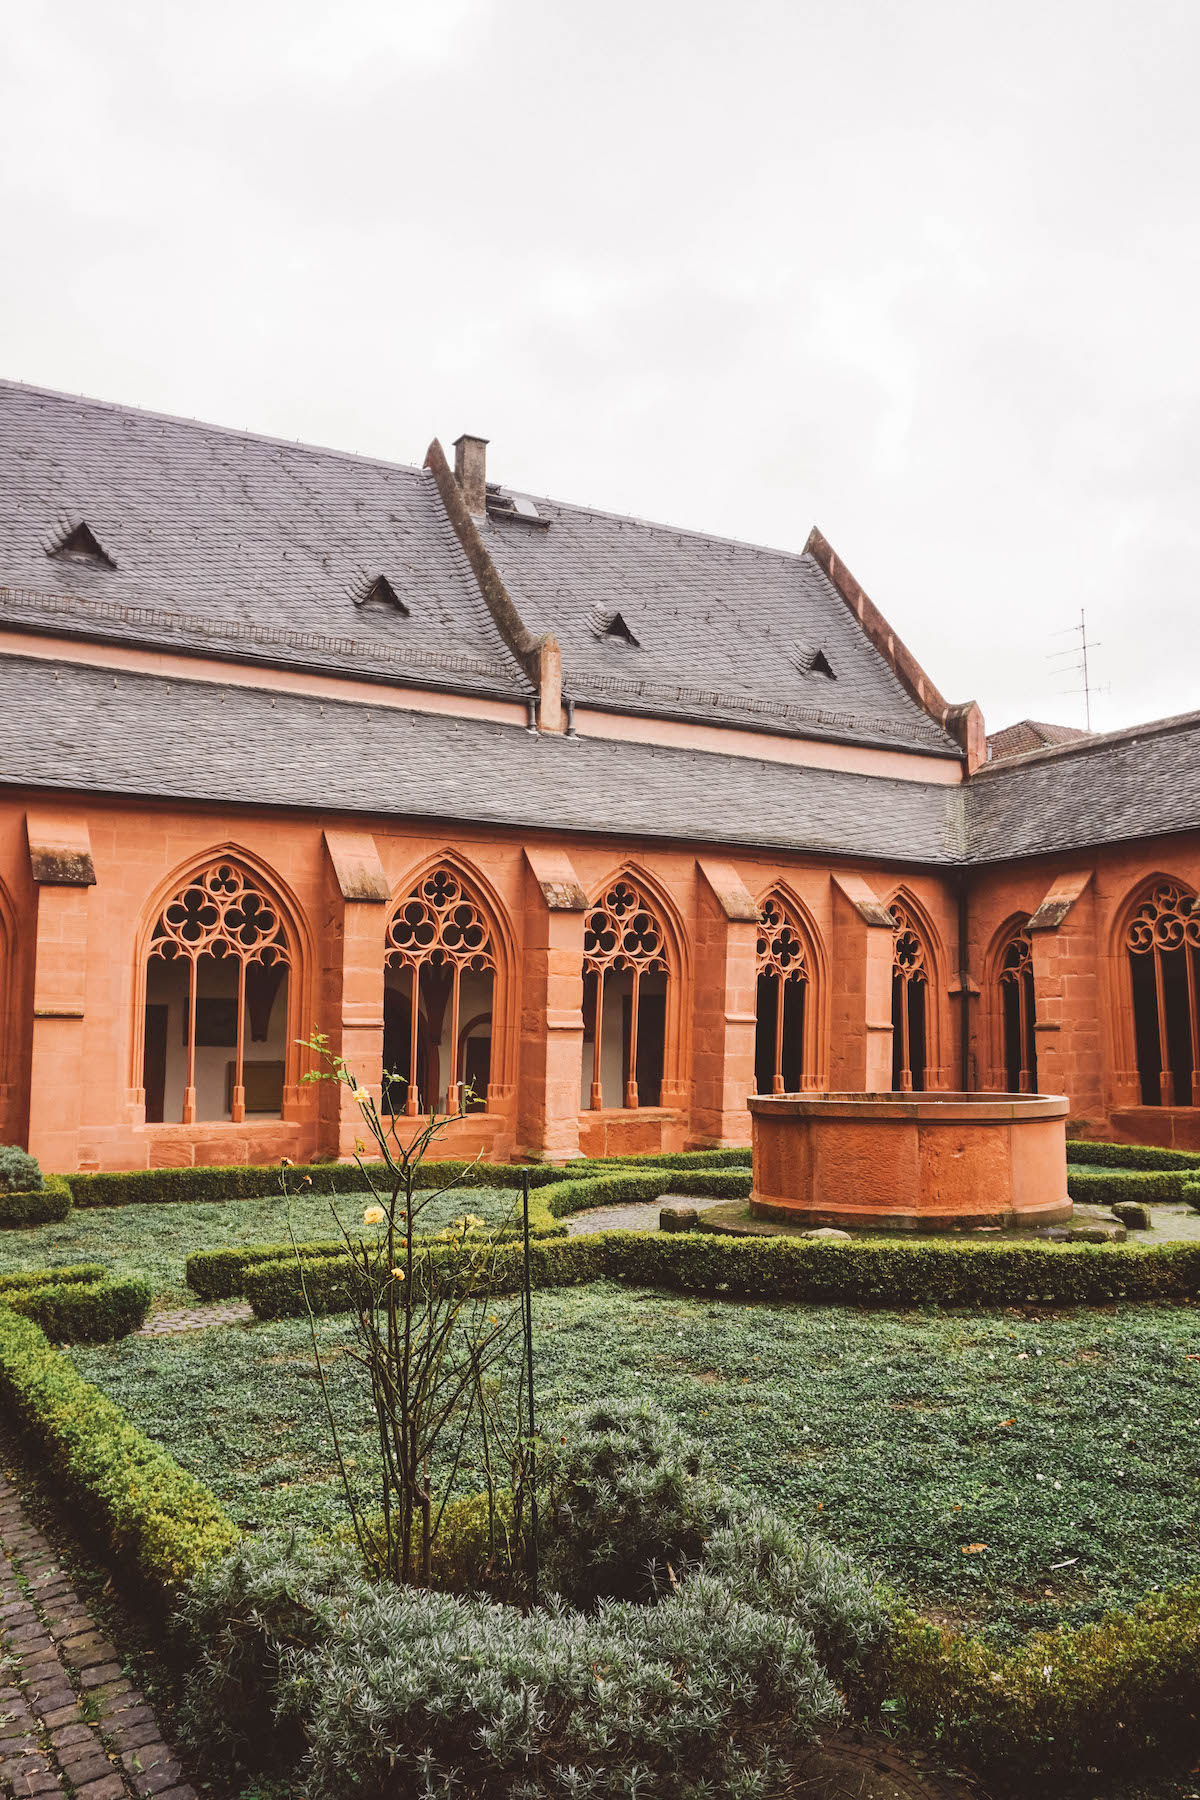 The inner courtyard of St. Stephan's in Mainz